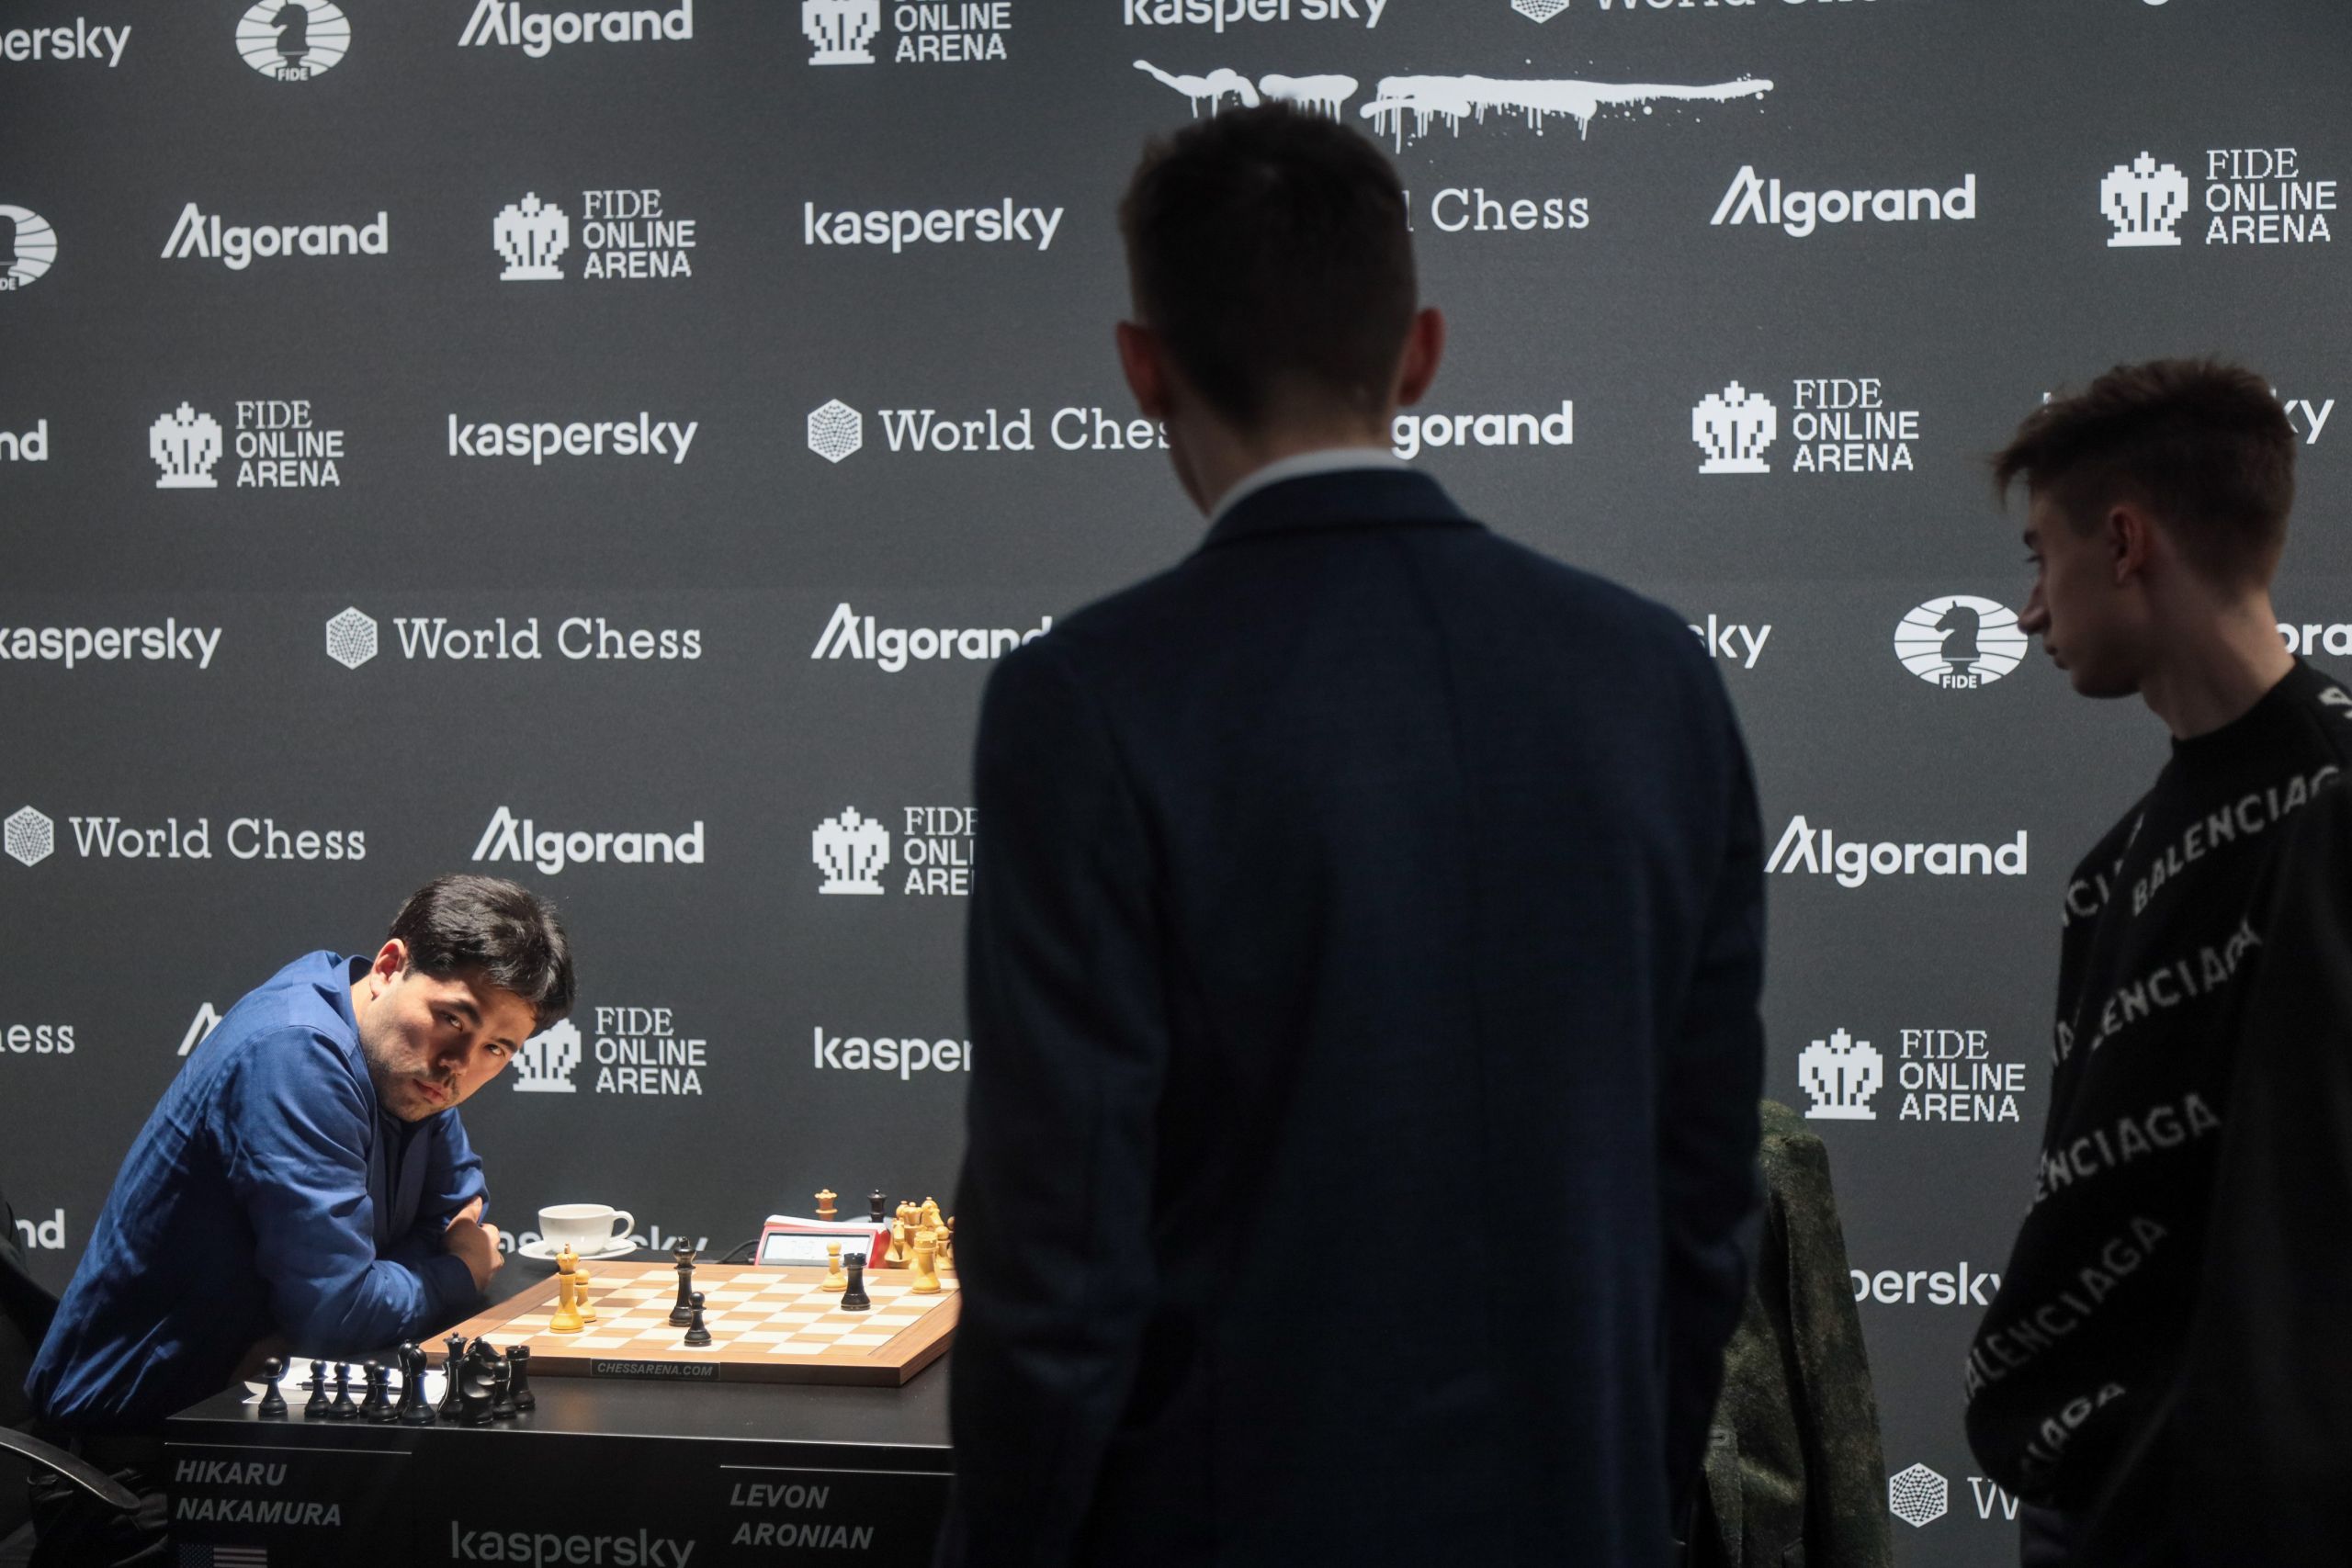 Nakamura unhappy with the security procedures at the FIDE